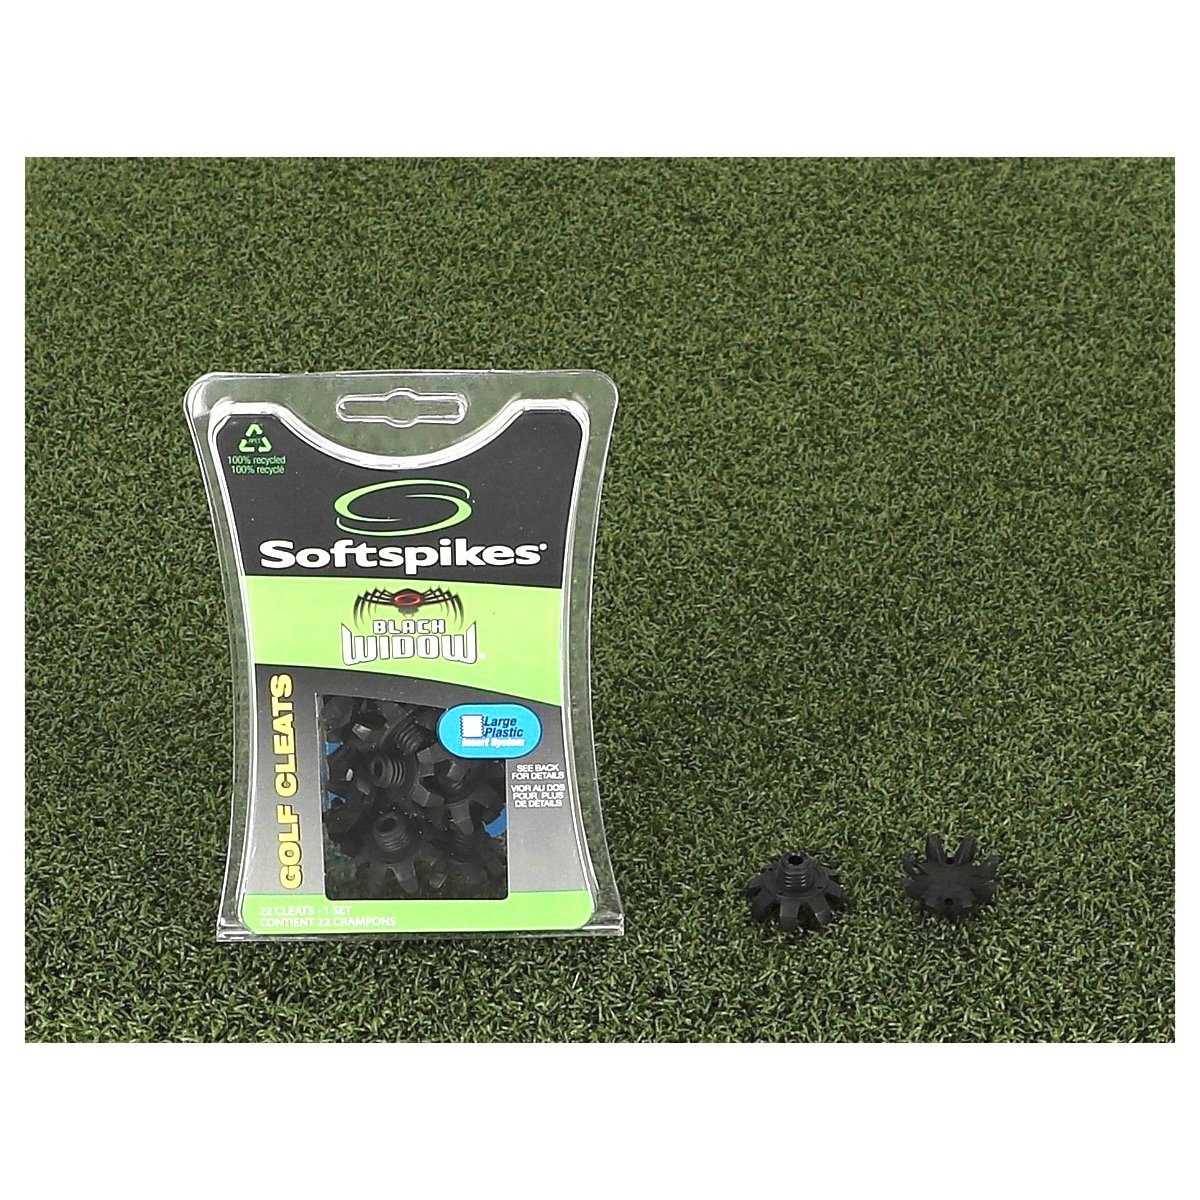 Softspikes Softspikes Spikes Large Thread Golfschuh